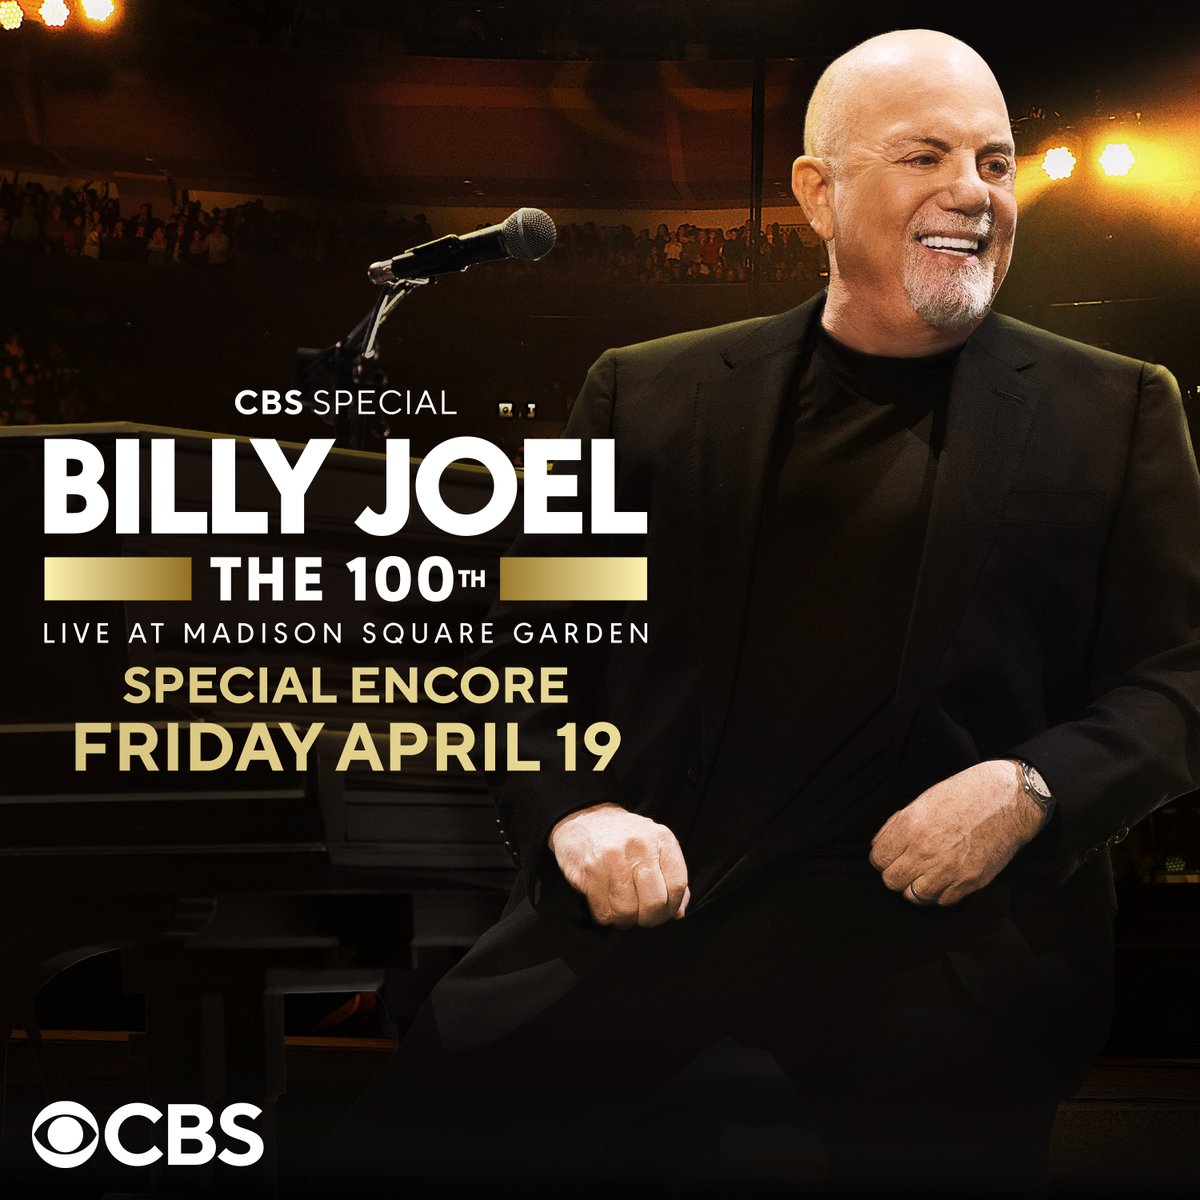 Don’t miss a special encore of @billyjoel: The 100th- Live at Madison Square Garden TONIGHT at 9/8c on @CBS ! Get your tickets today to see him live at Intuit Dome on Saturday, October 12th! 🎹🎶